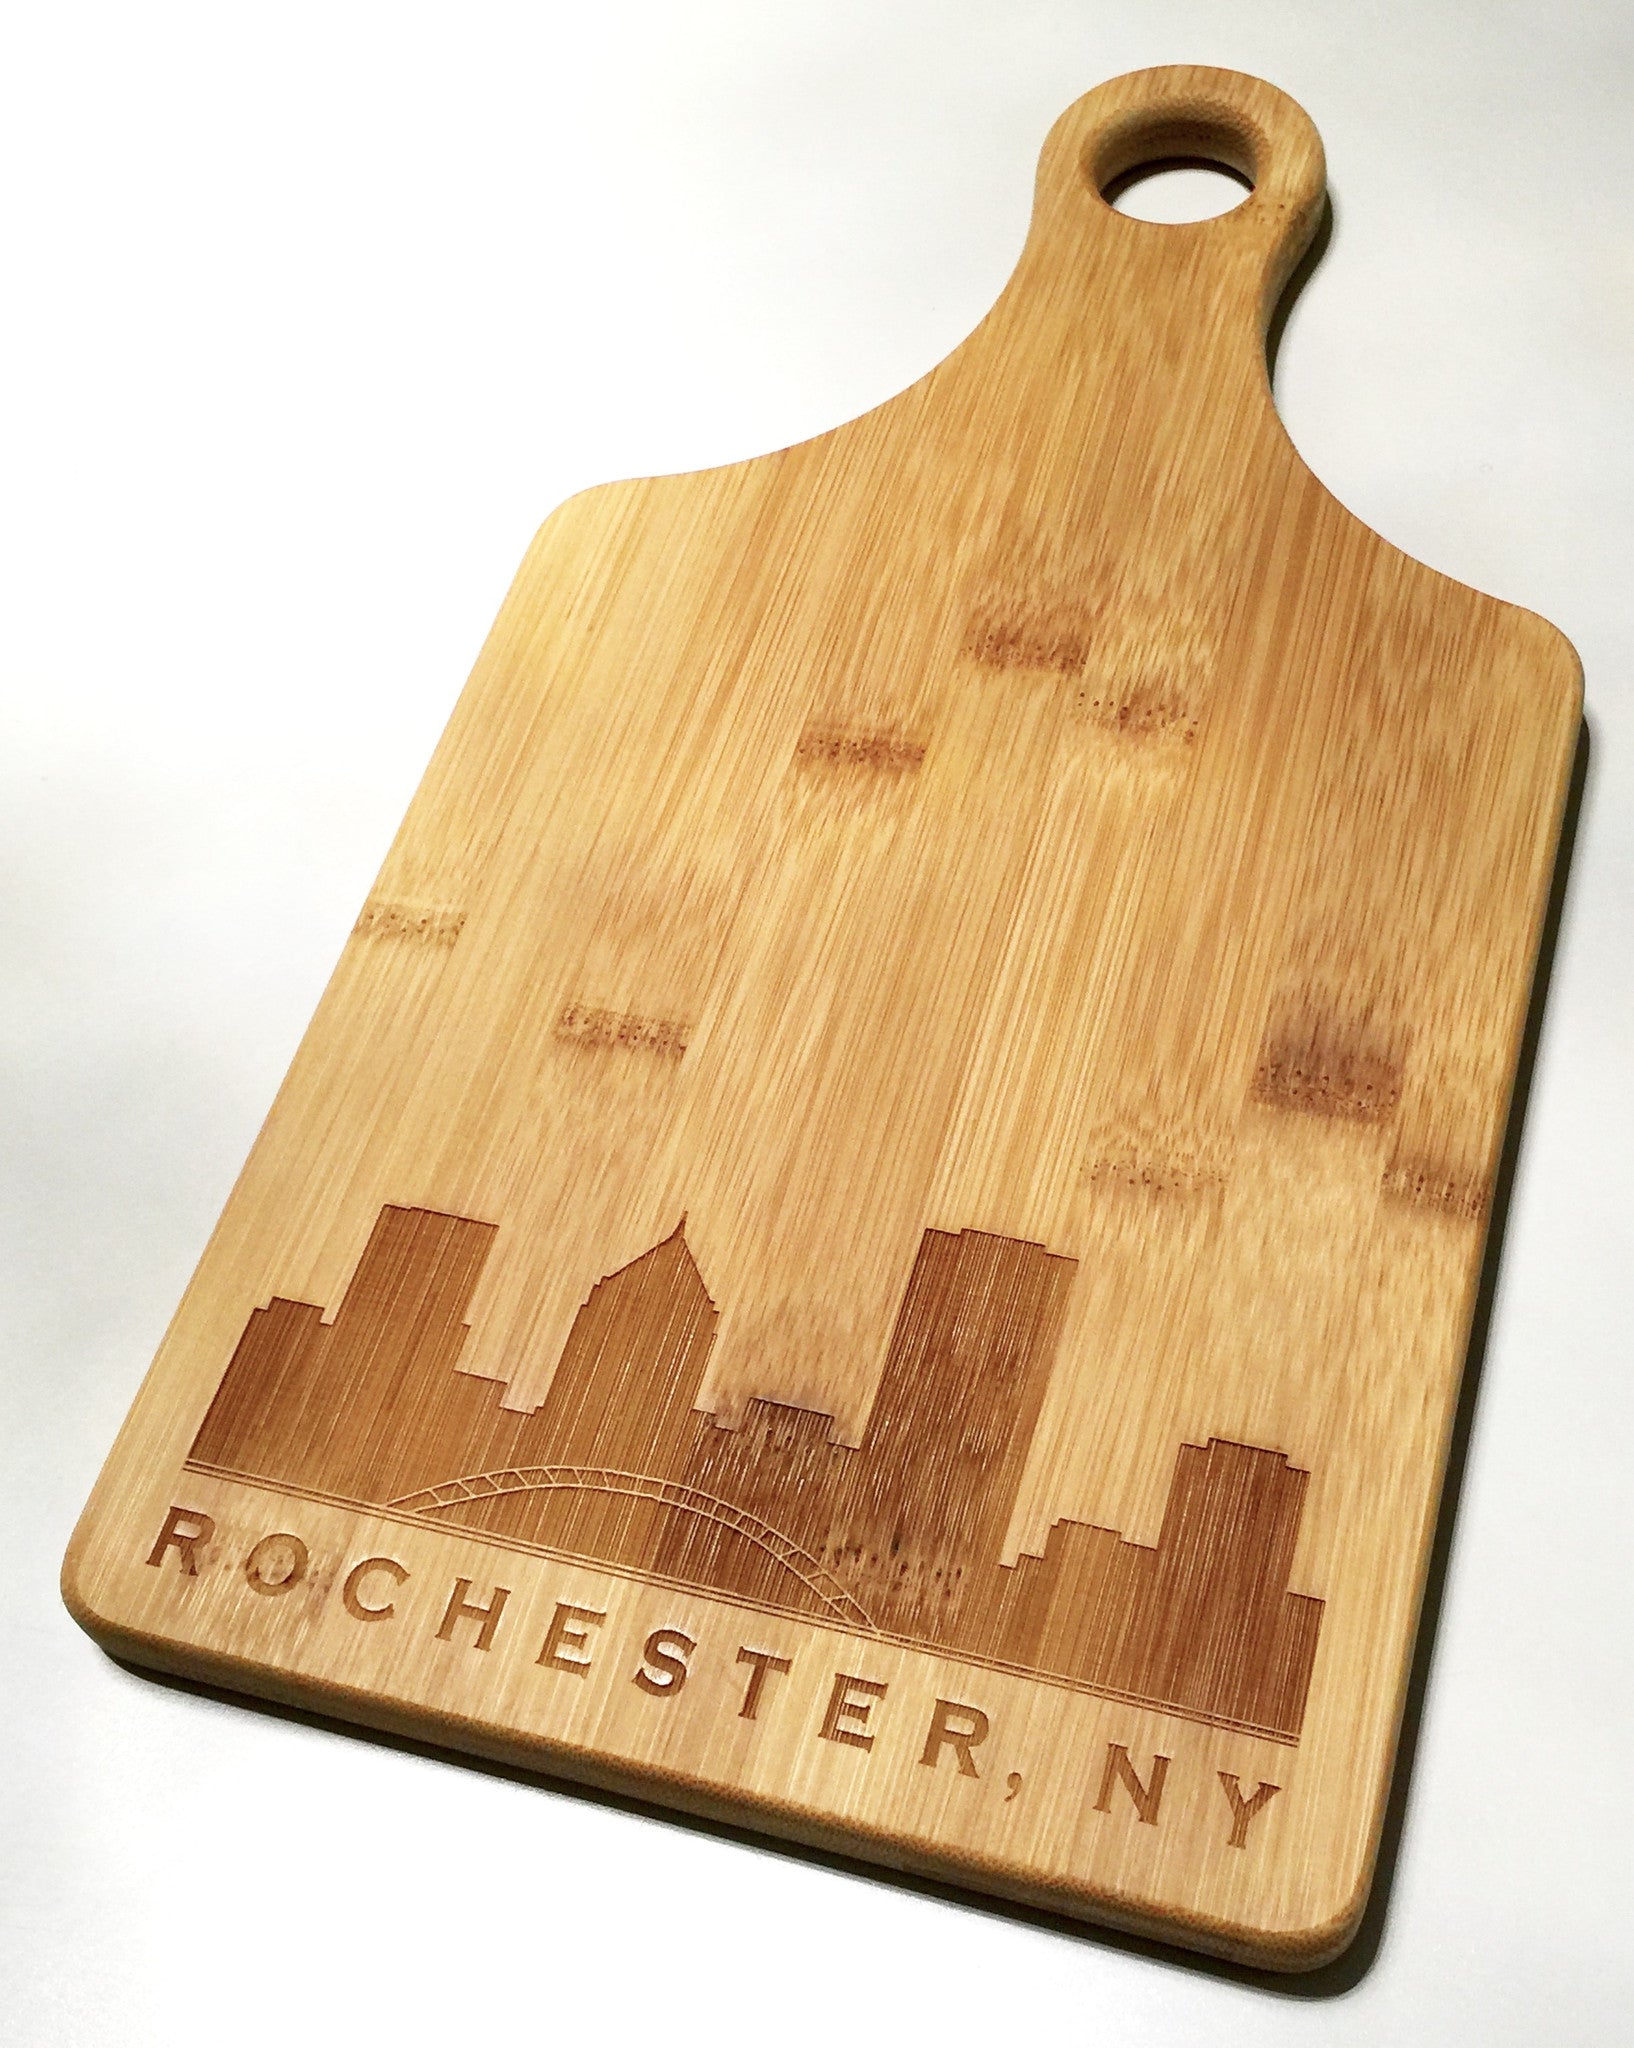 Rochester Bamboo Cutting Board - The BFLO Store